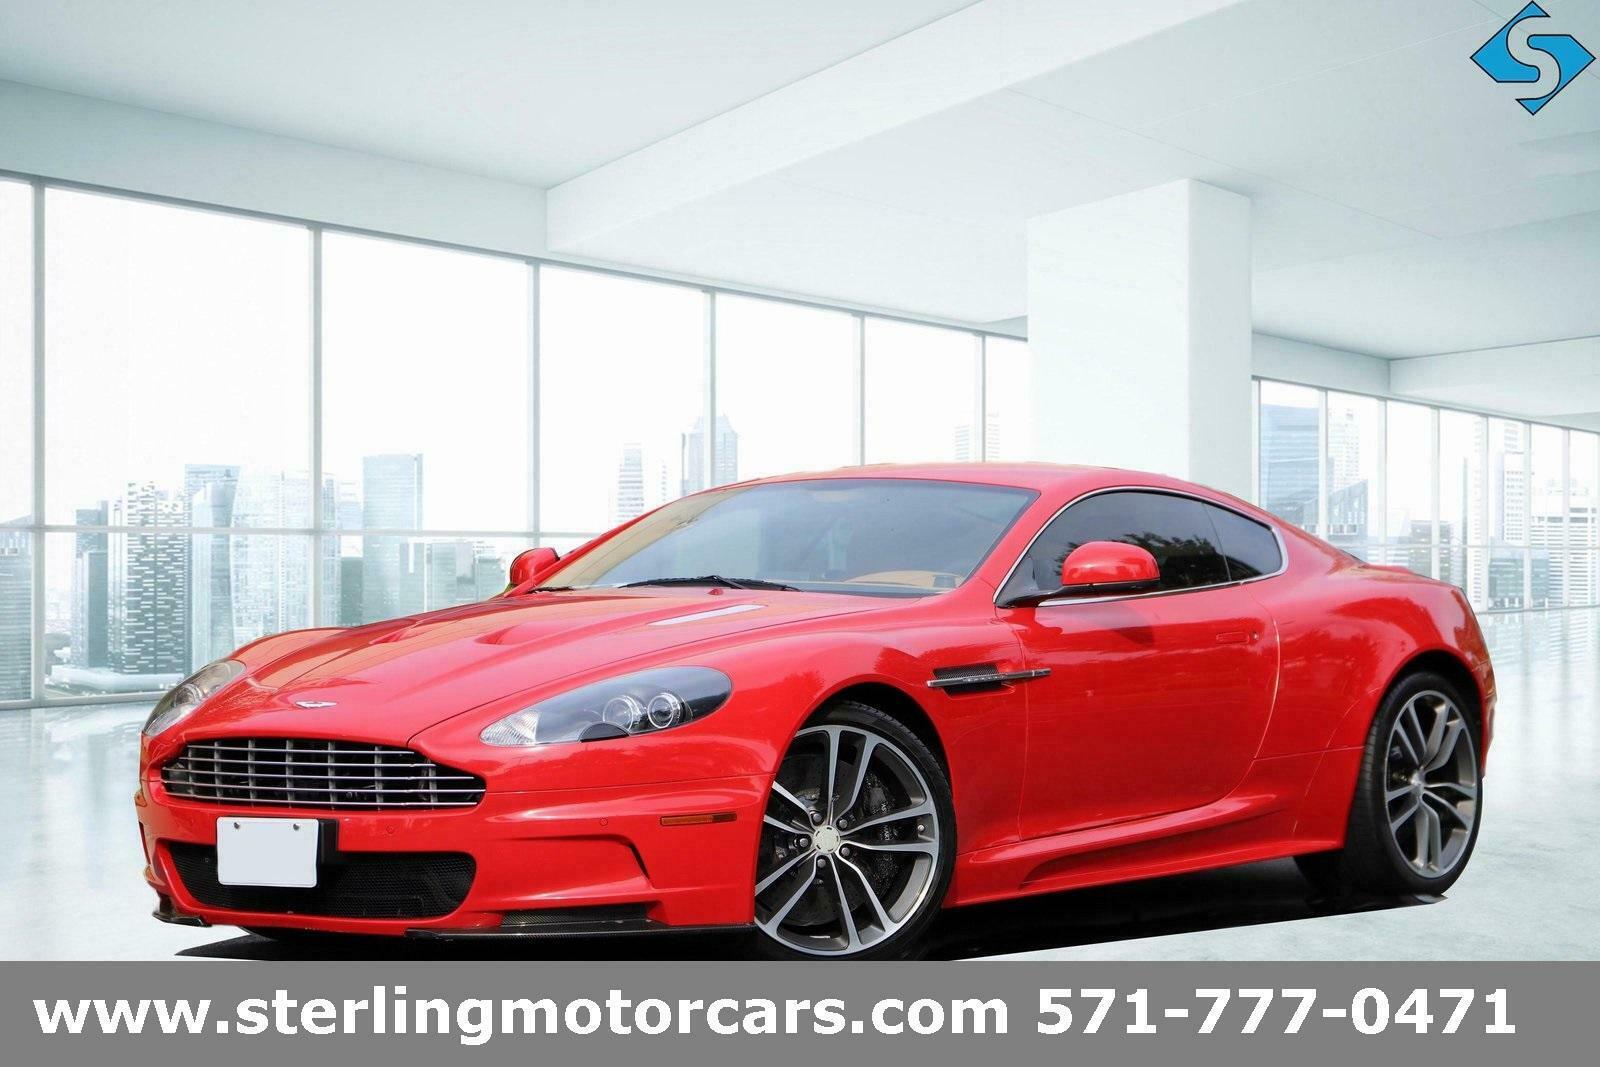 2011 Aston Martin Dbs 2dr Cpe 2011 Aston Martin Dbs, Special Color/match To Sample With 9062 Miles Available N